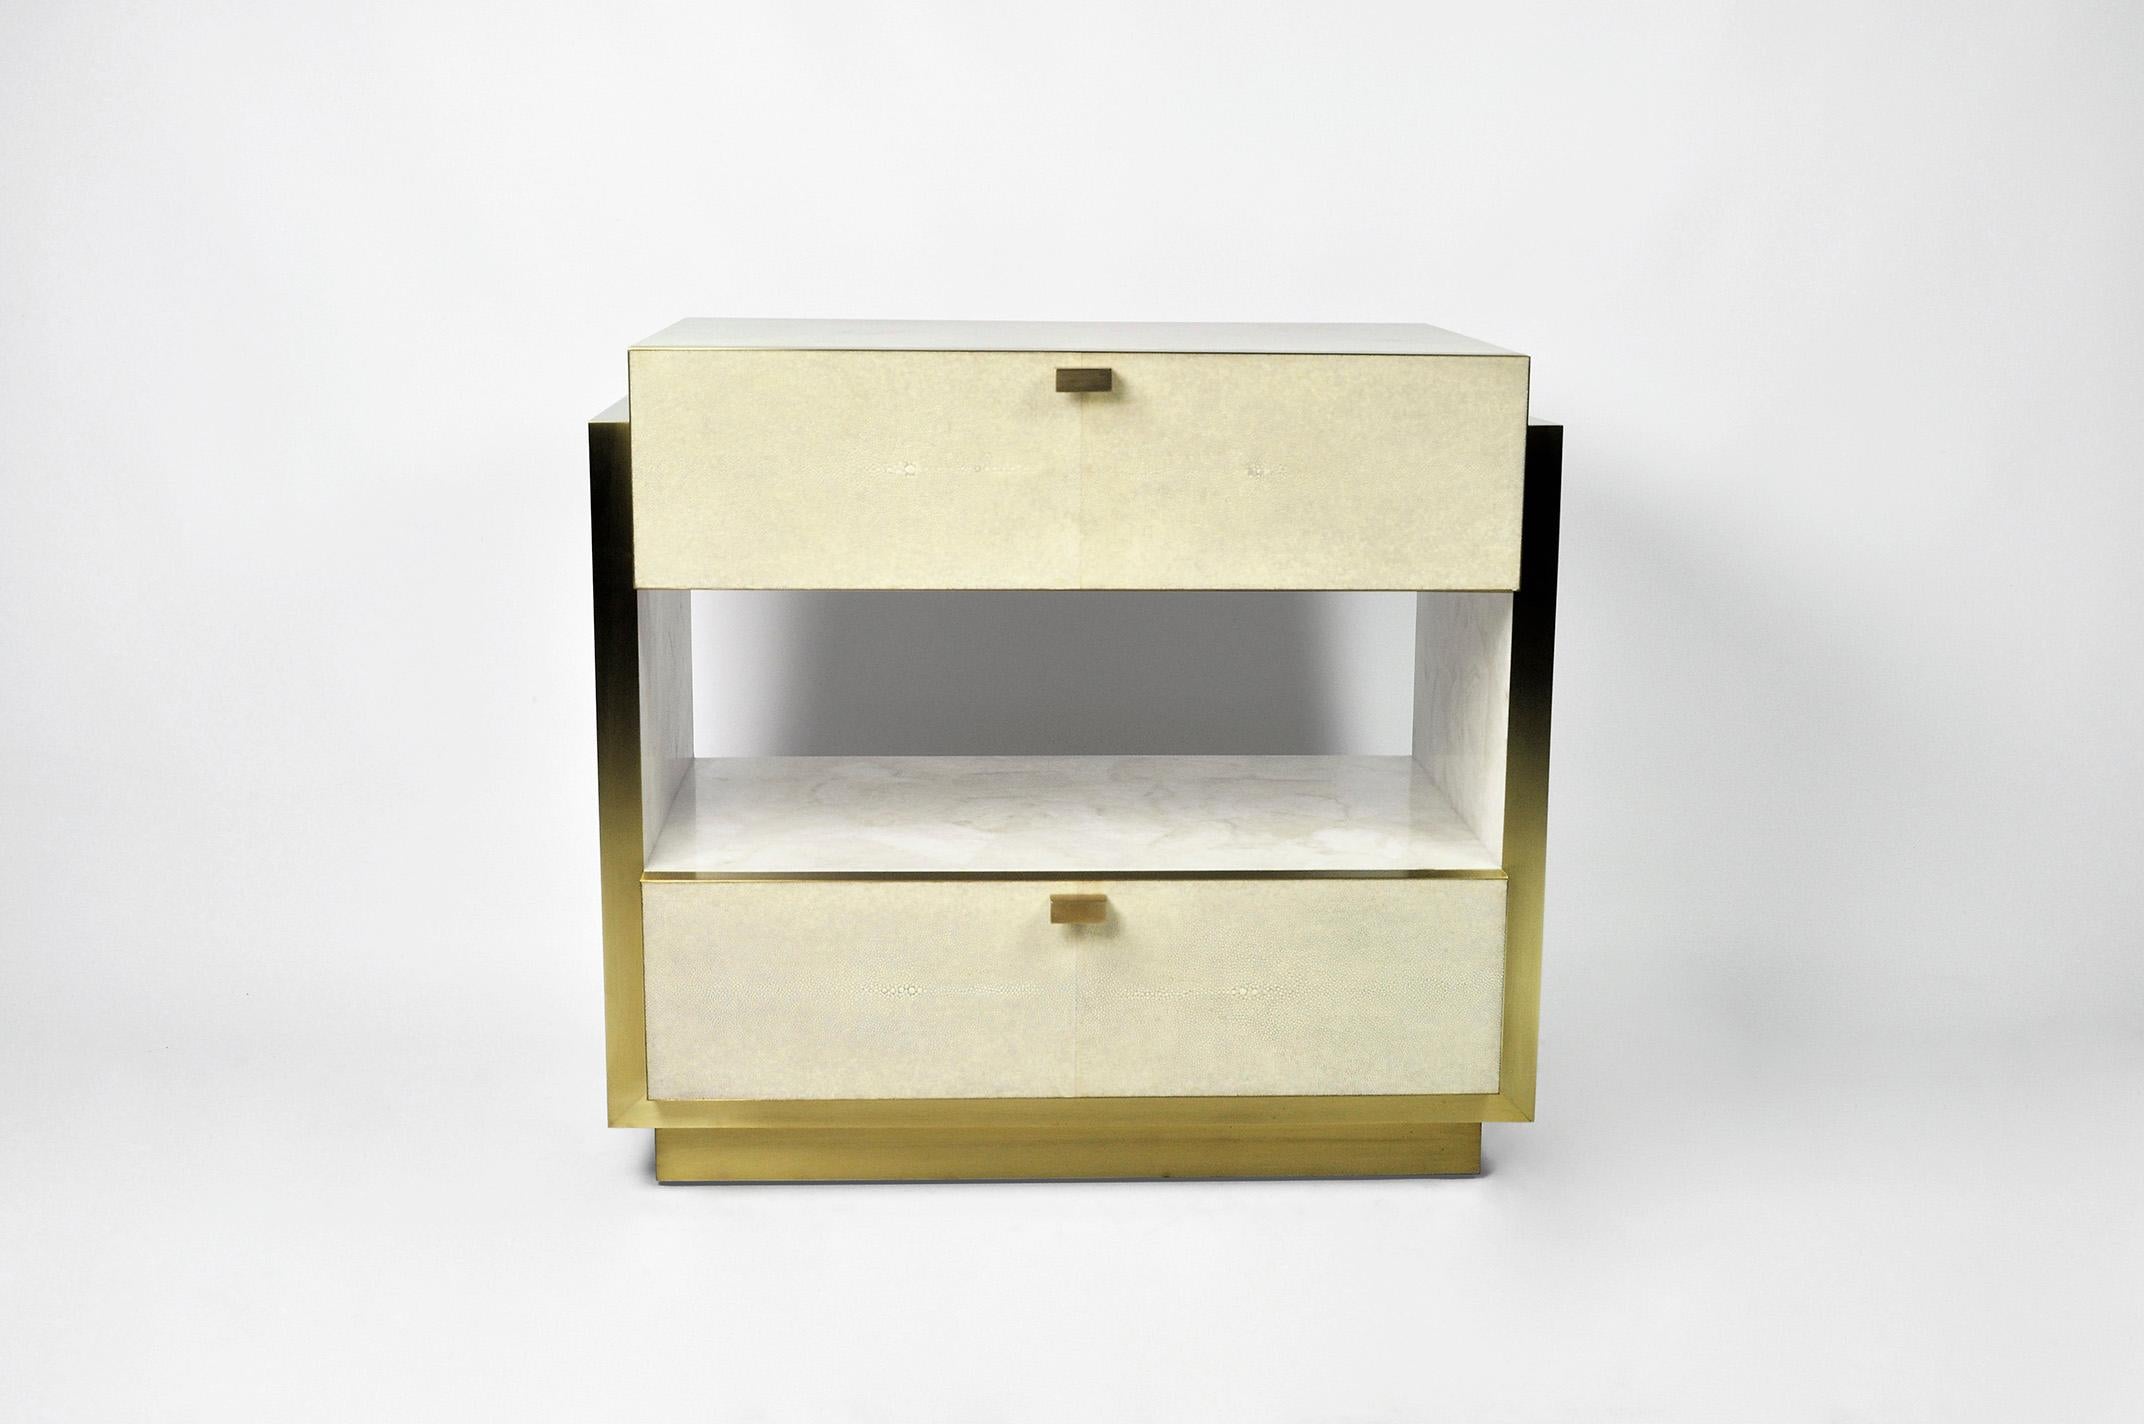 This rectangular bedside table has two drawers and it is made of white rock crystal marquetry with shagreen drawers.
The edges and the base have brass trims.
The handles are in brass.

The dimensions of this piece are W23.6